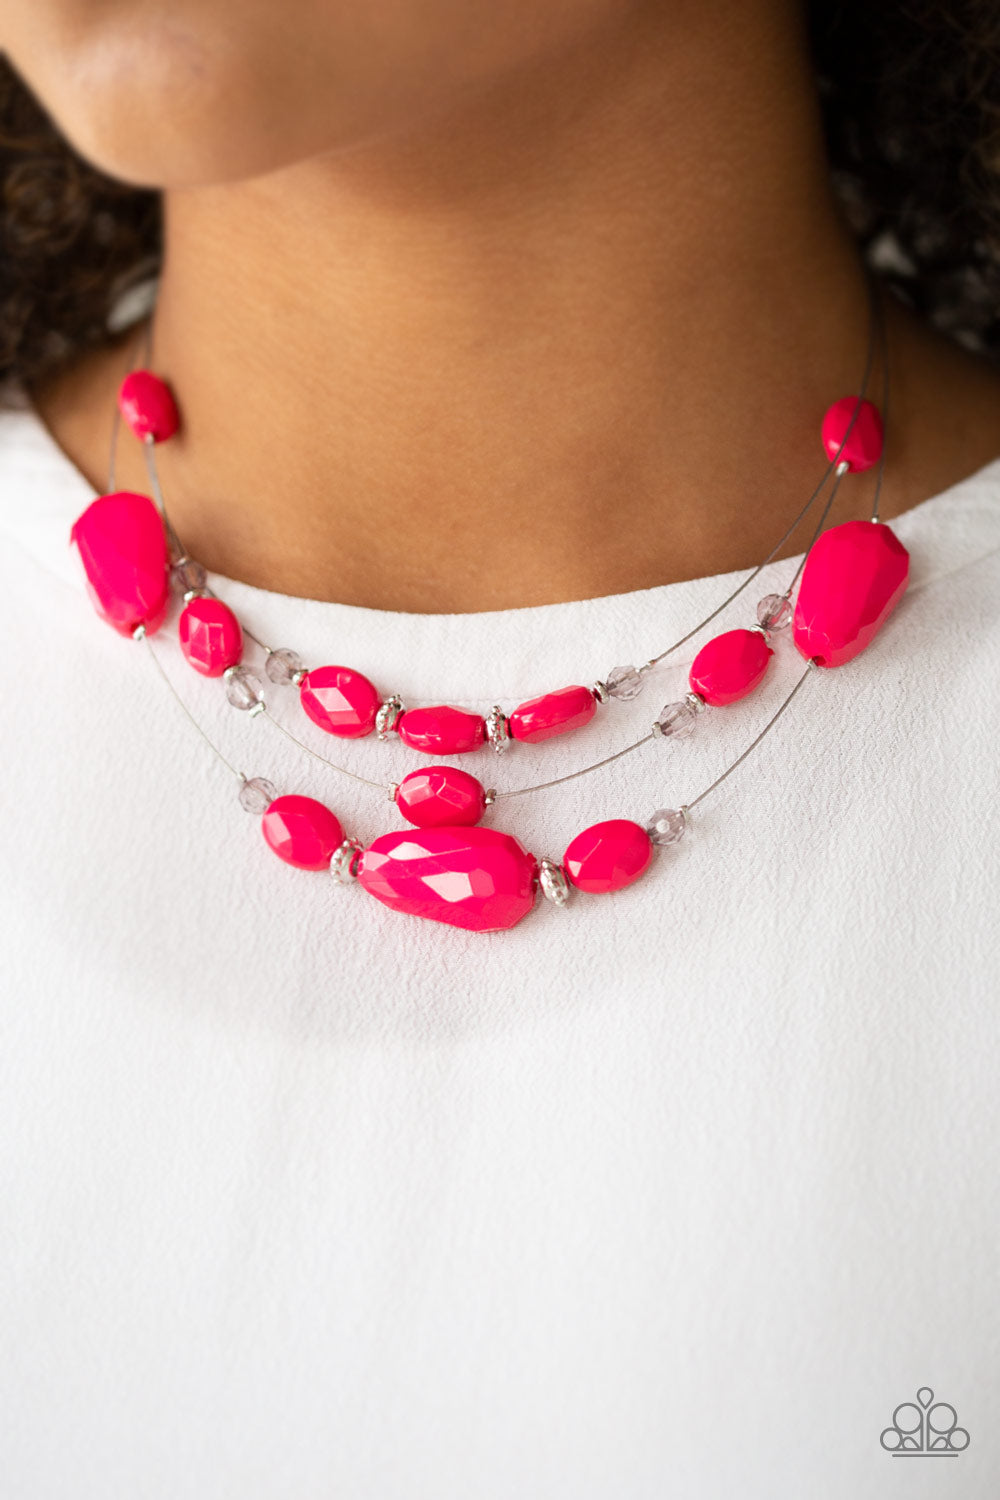 Radiant Reflections - Pink Necklace And Earrings